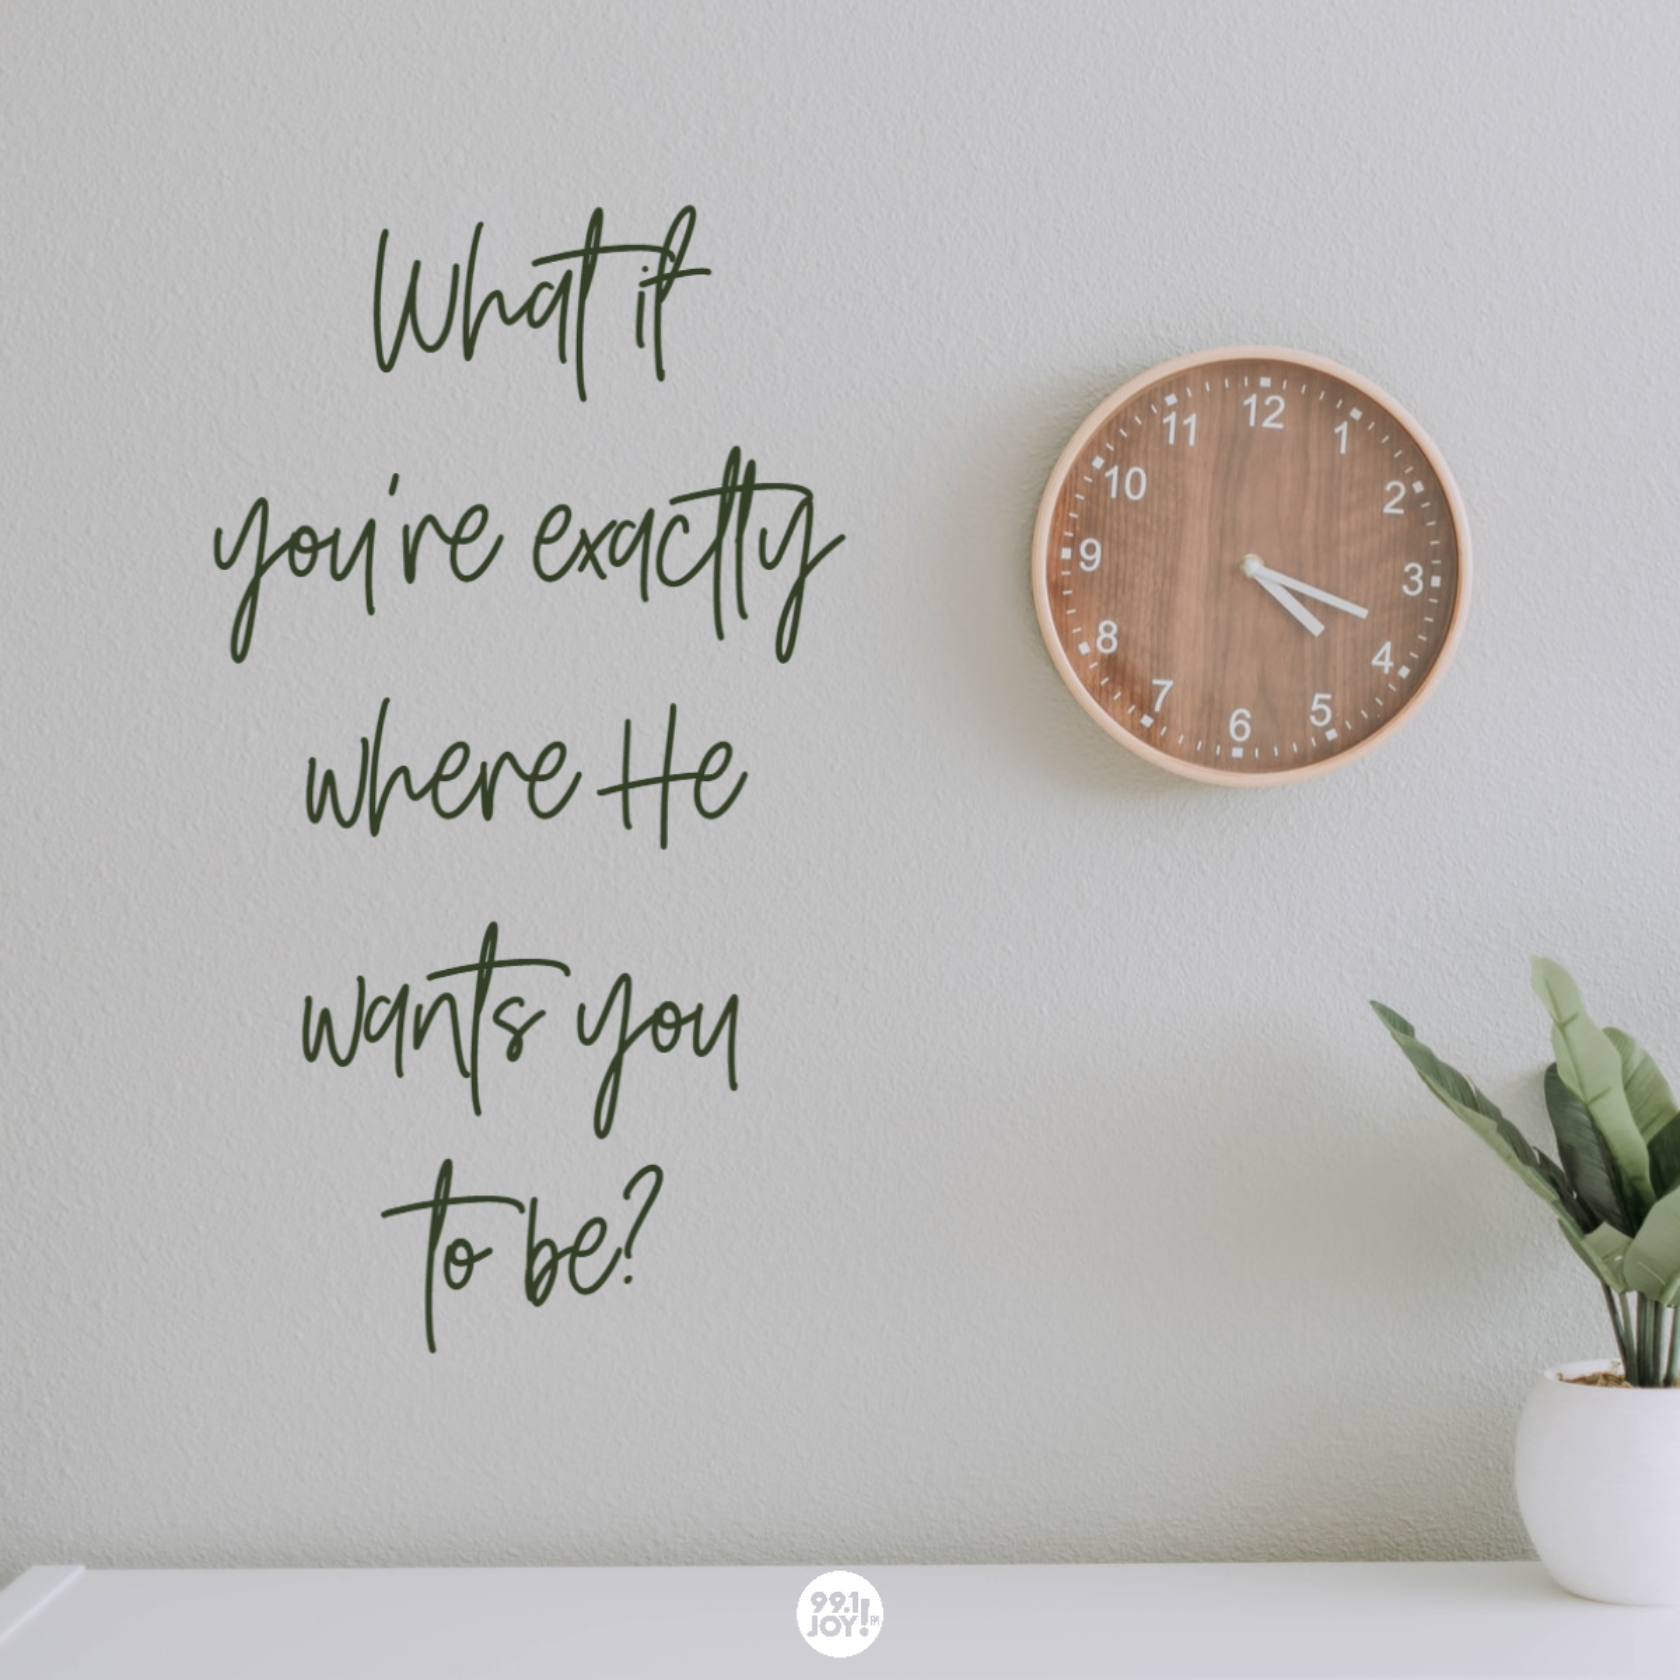 What If You're Exactly Where He Wants You To Be?